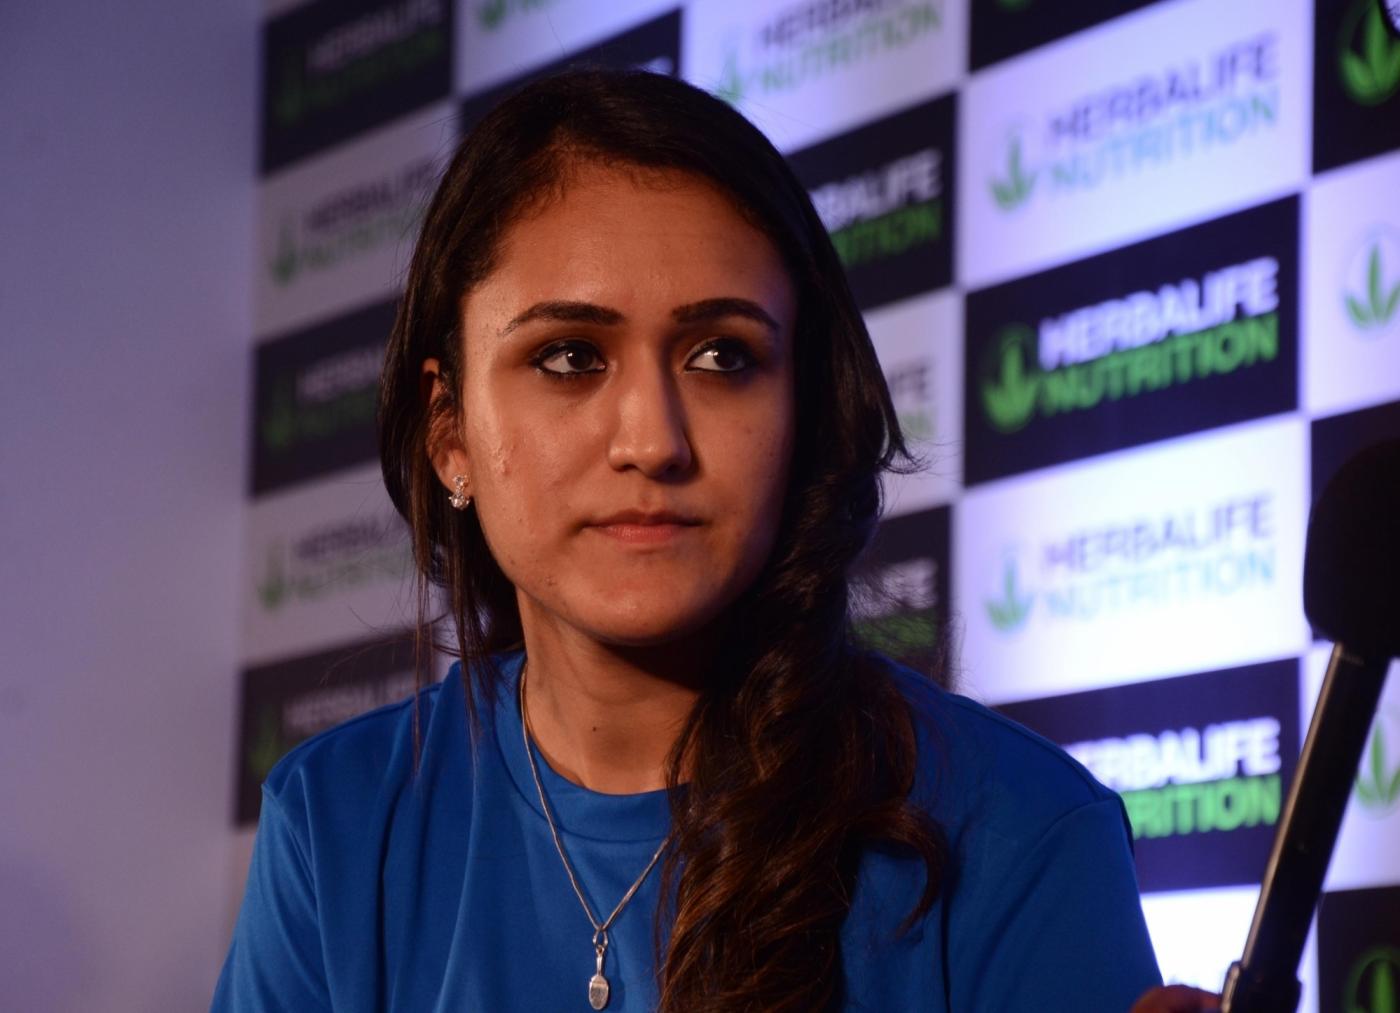 New Delhi: Table tennis player Manika Batra during a programme, in New Delhi on Sept 20, 2018. (Photo: IANS) by .